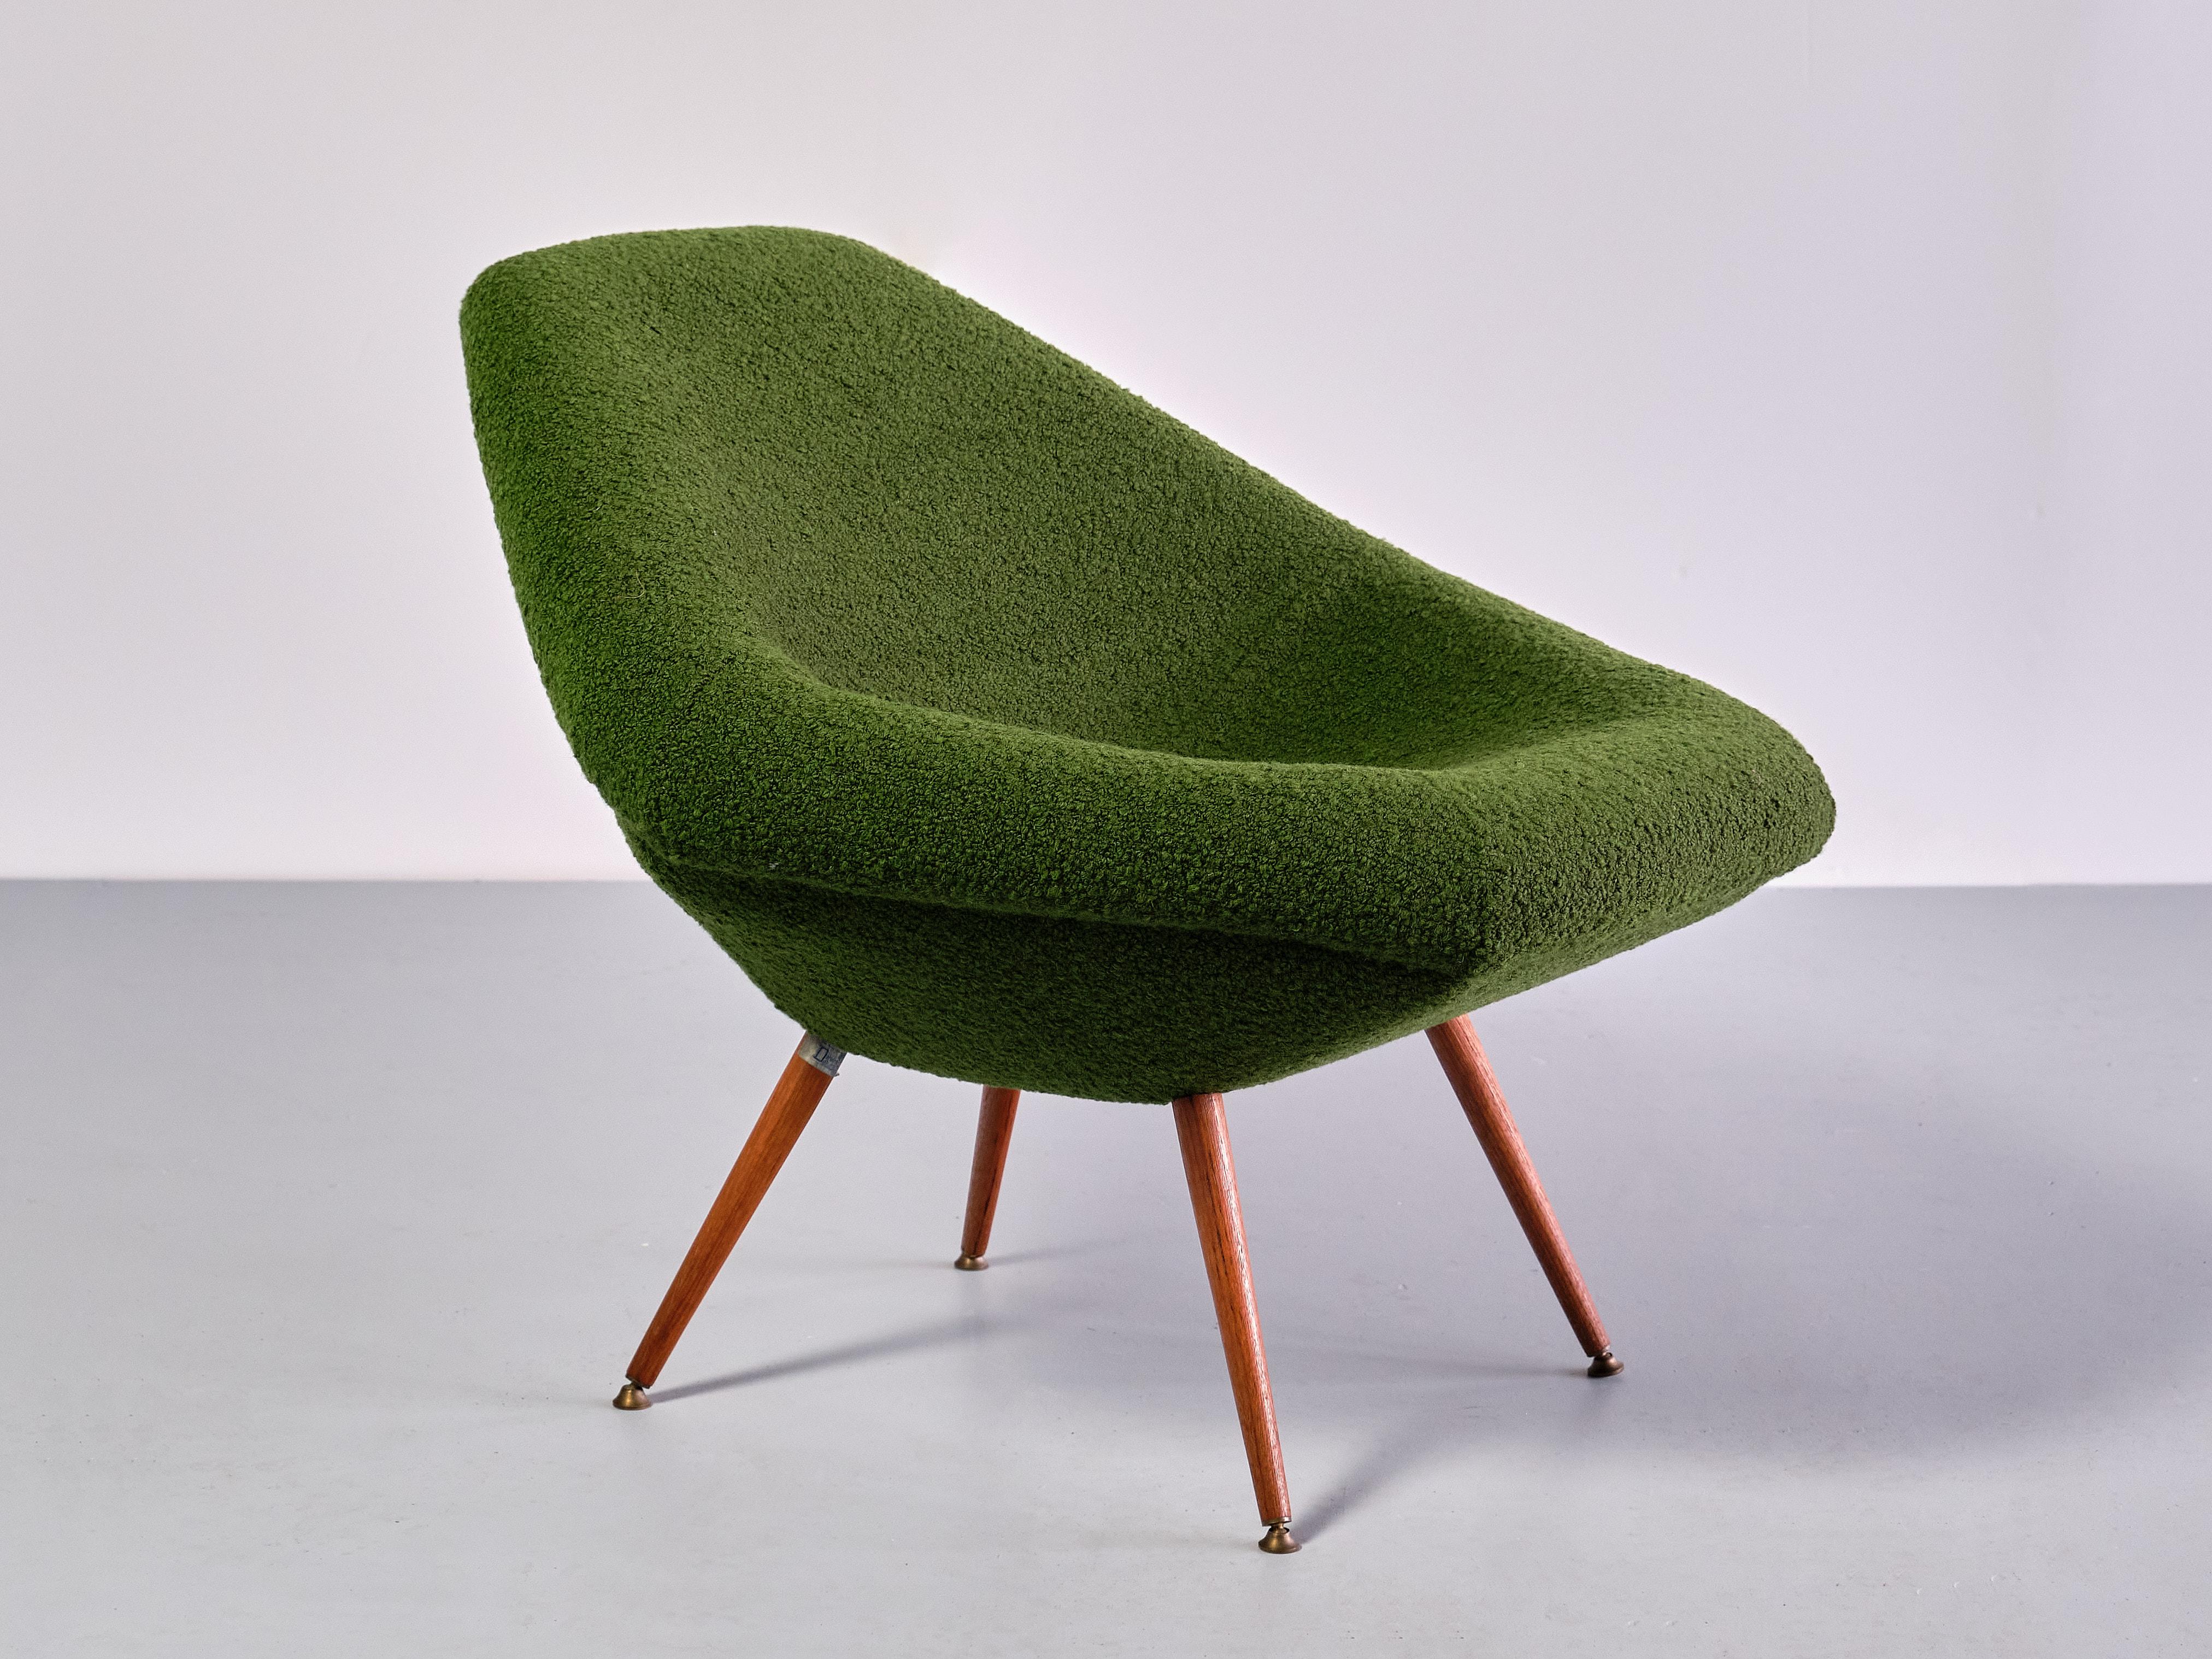 Pair of Arne Dahlén Lounge Chairs in Green Bouclé and Teak, Sweden, 1960s For Sale 1